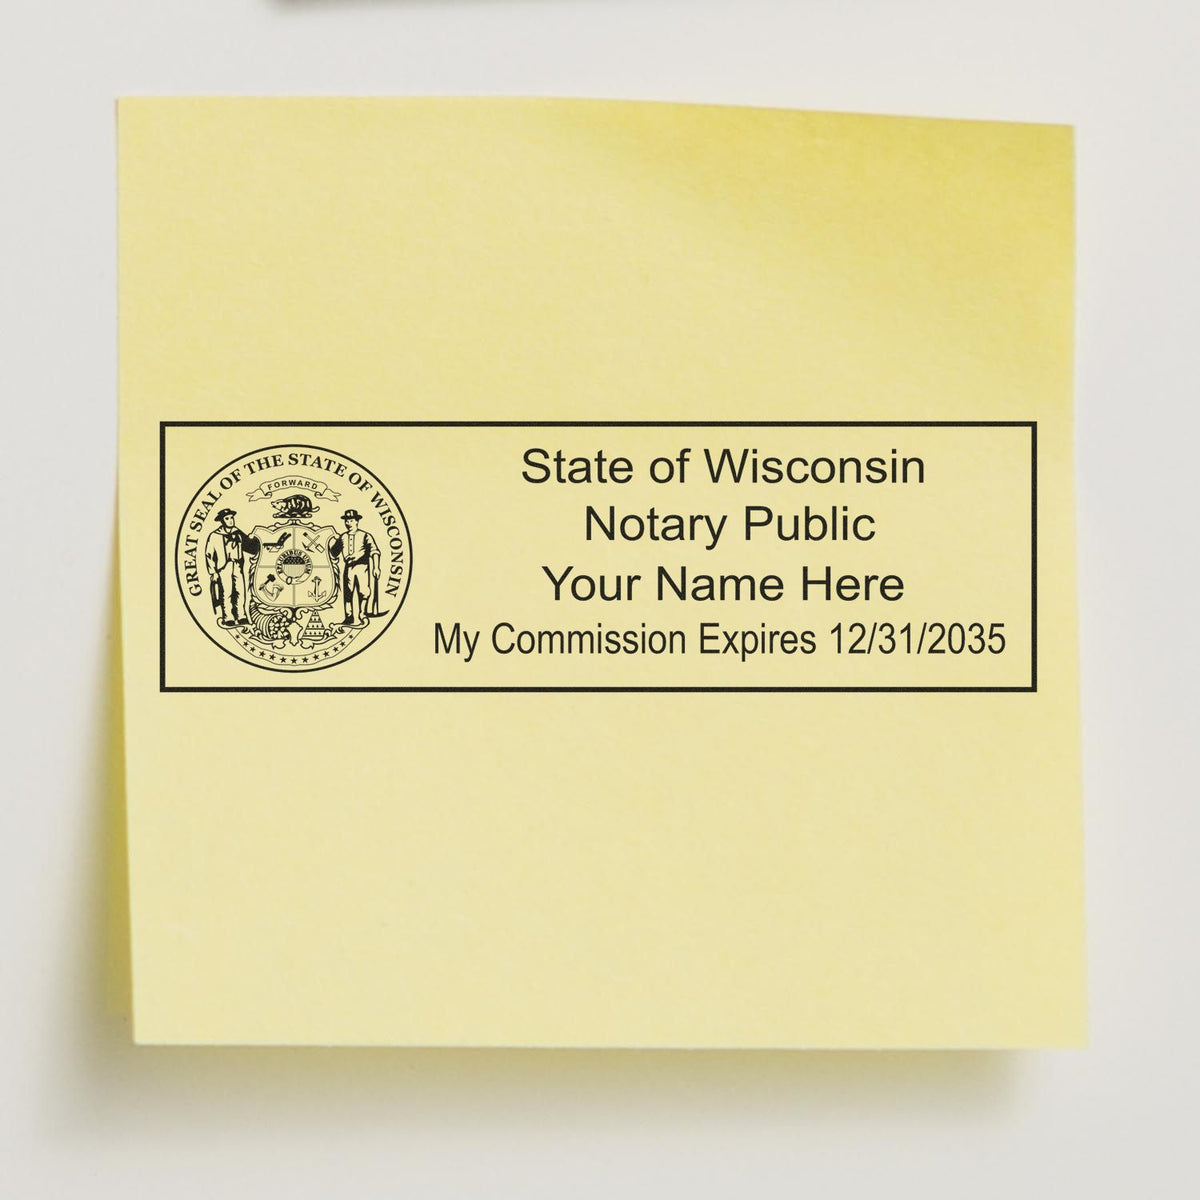 Another Example of a stamped impression of the Heavy-Duty Wisconsin Rectangular Notary Stamp on a piece of office paper.